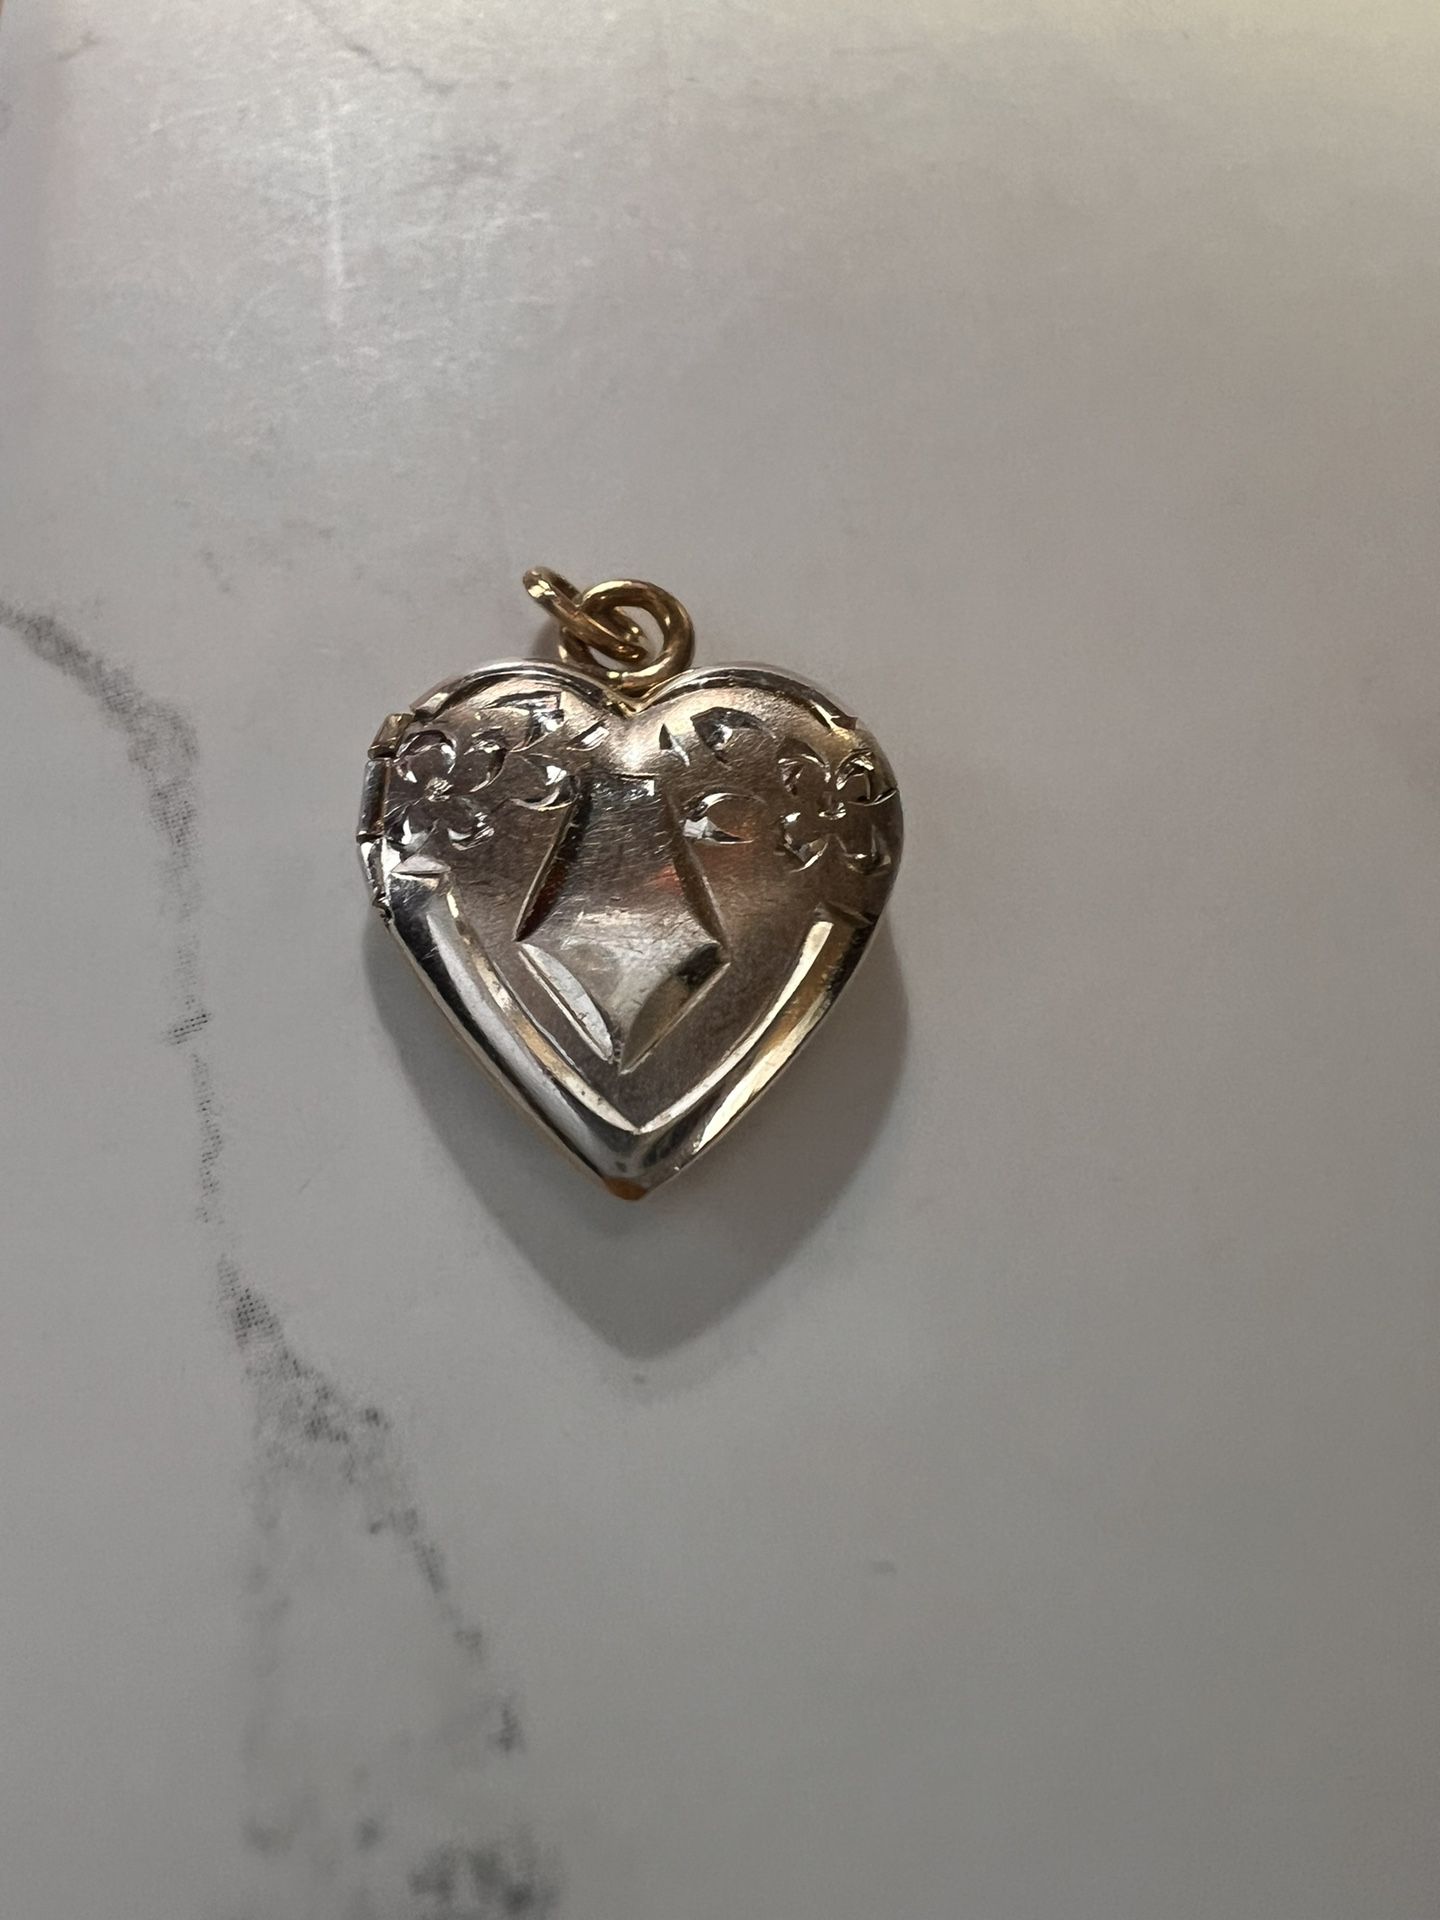 10K YELLOW GOLD HEART LOCKET TWO TONE GOLD AND WHITE GOLD 